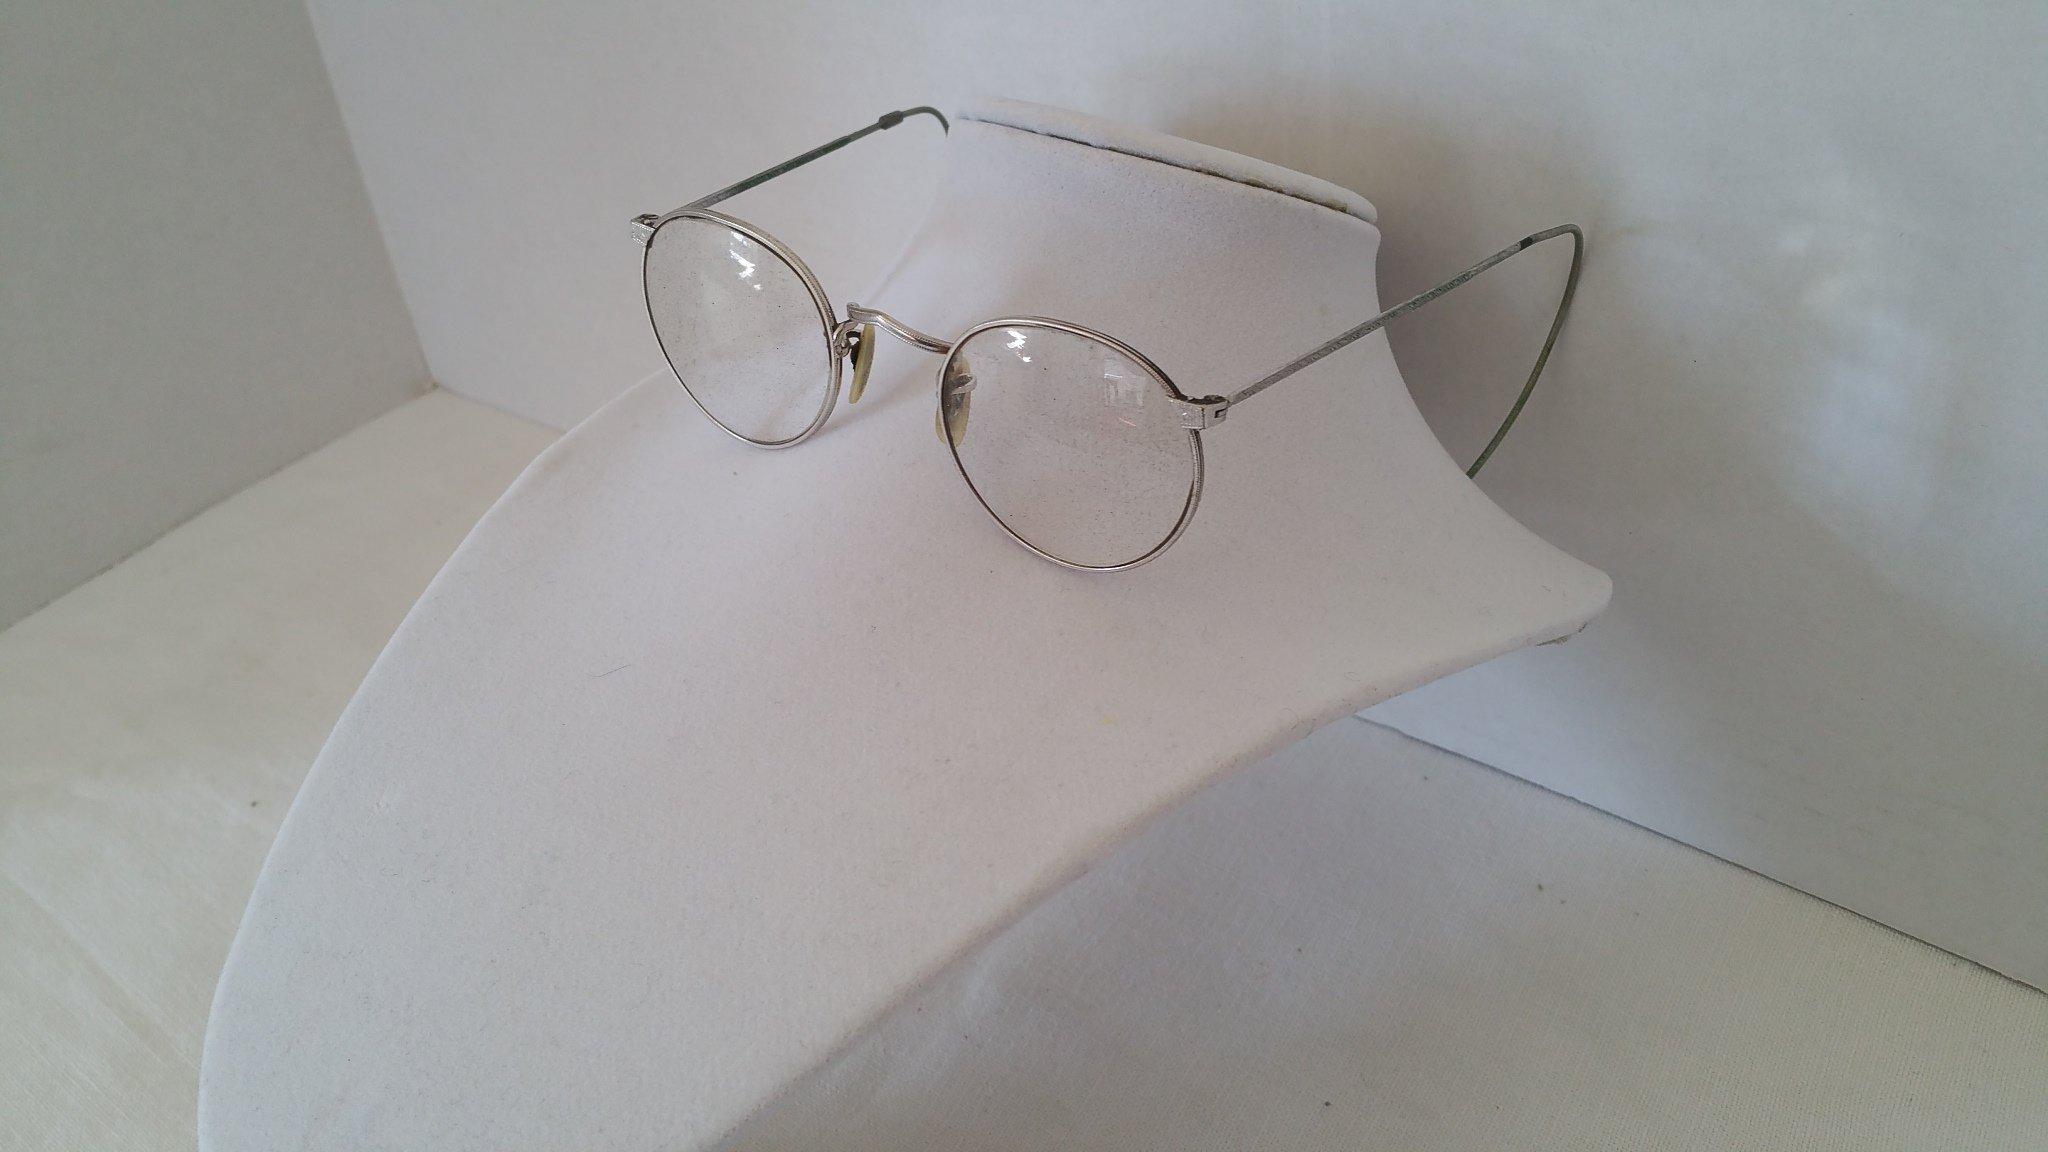 Pair of Silver round Vintage Glasses